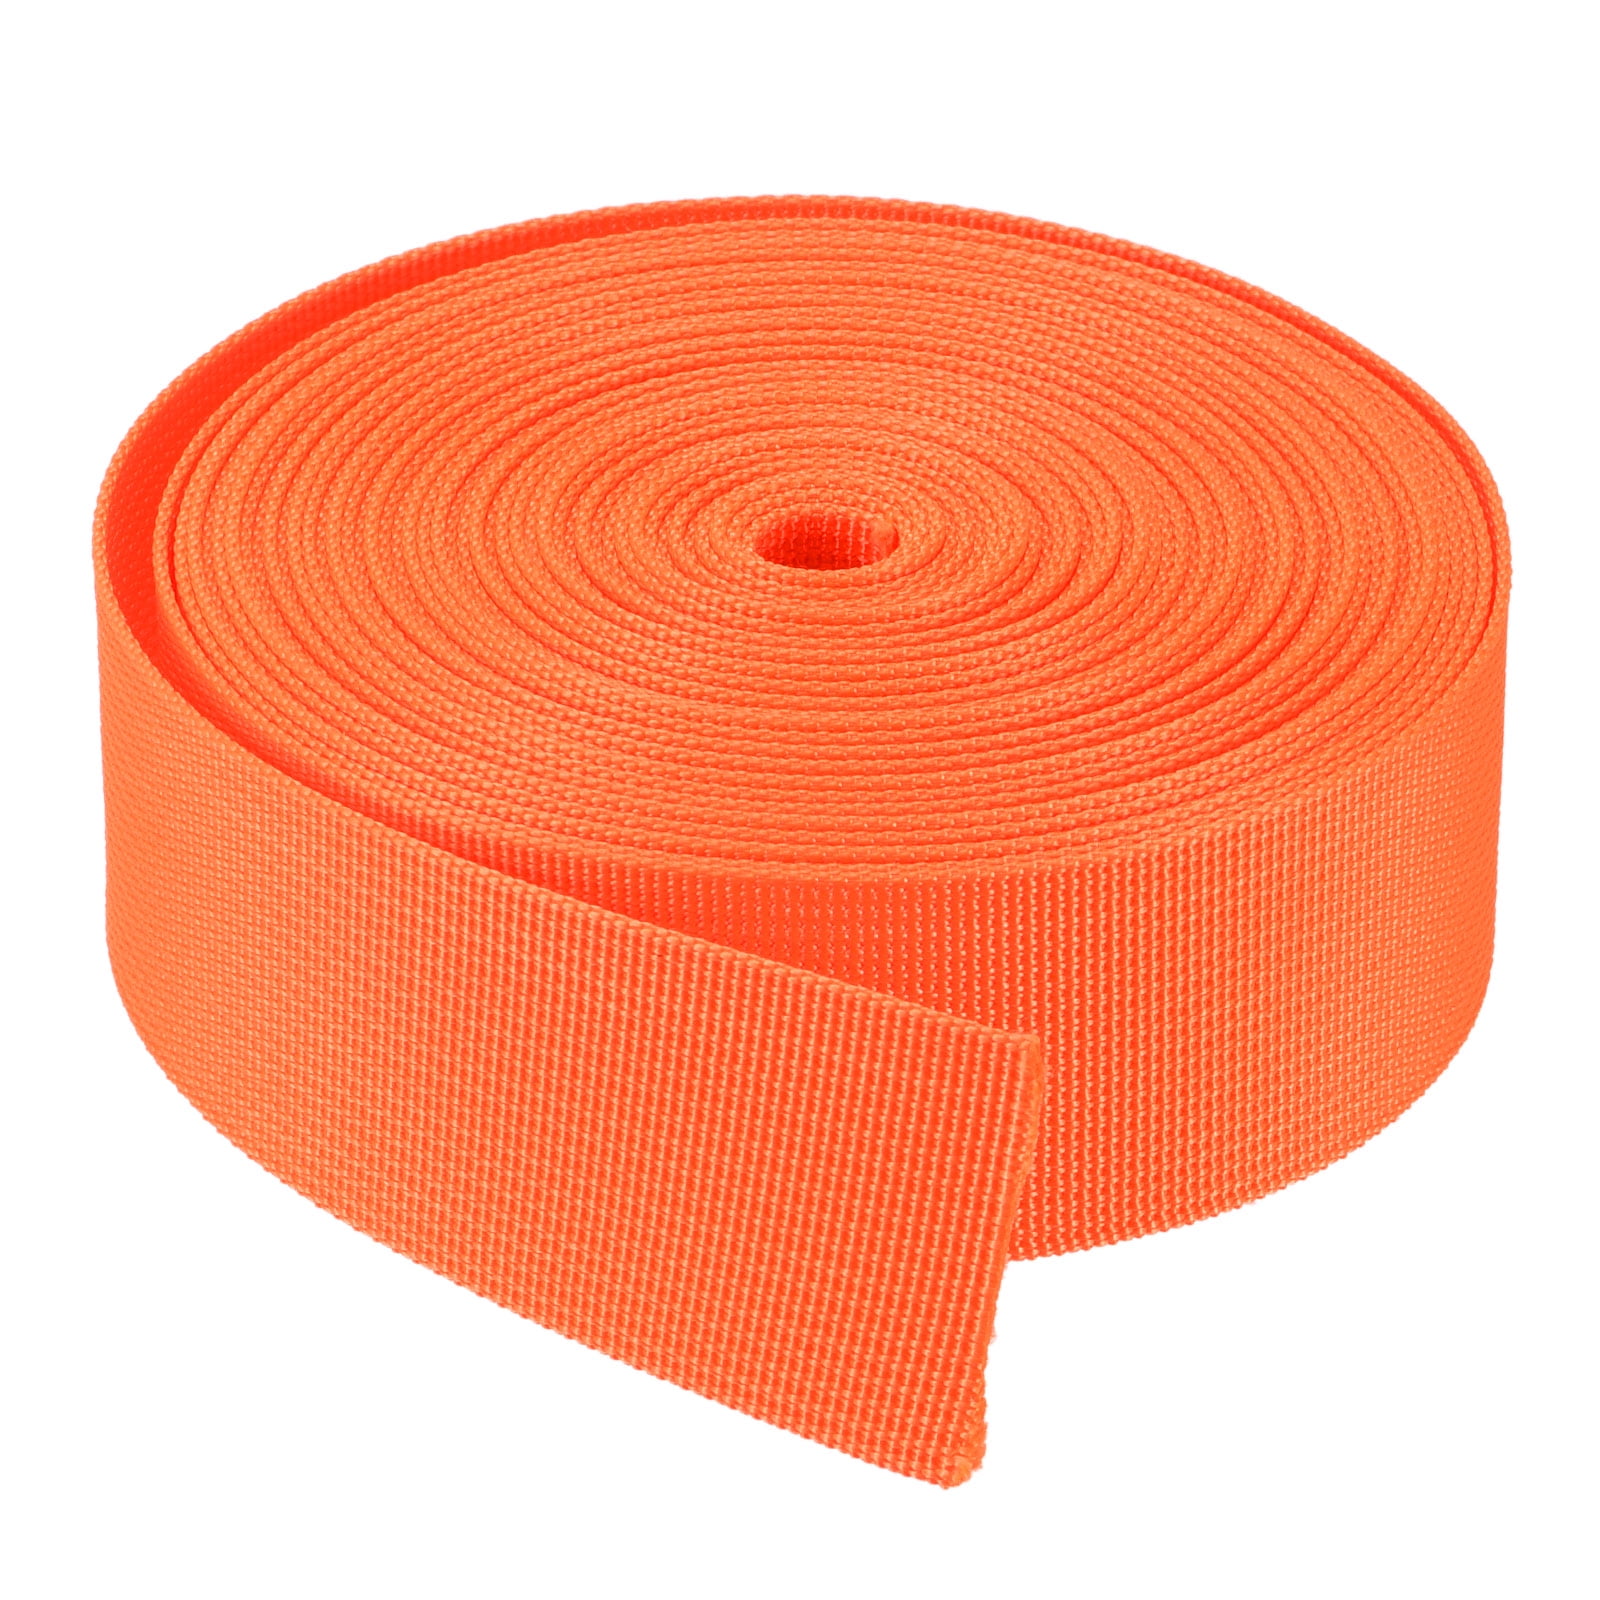 1 Orange Nylon Webbing, Orange Nylon Webbing 1 Inch Wide 25mm, Belting,  Strapping, Pet Product Webbing 